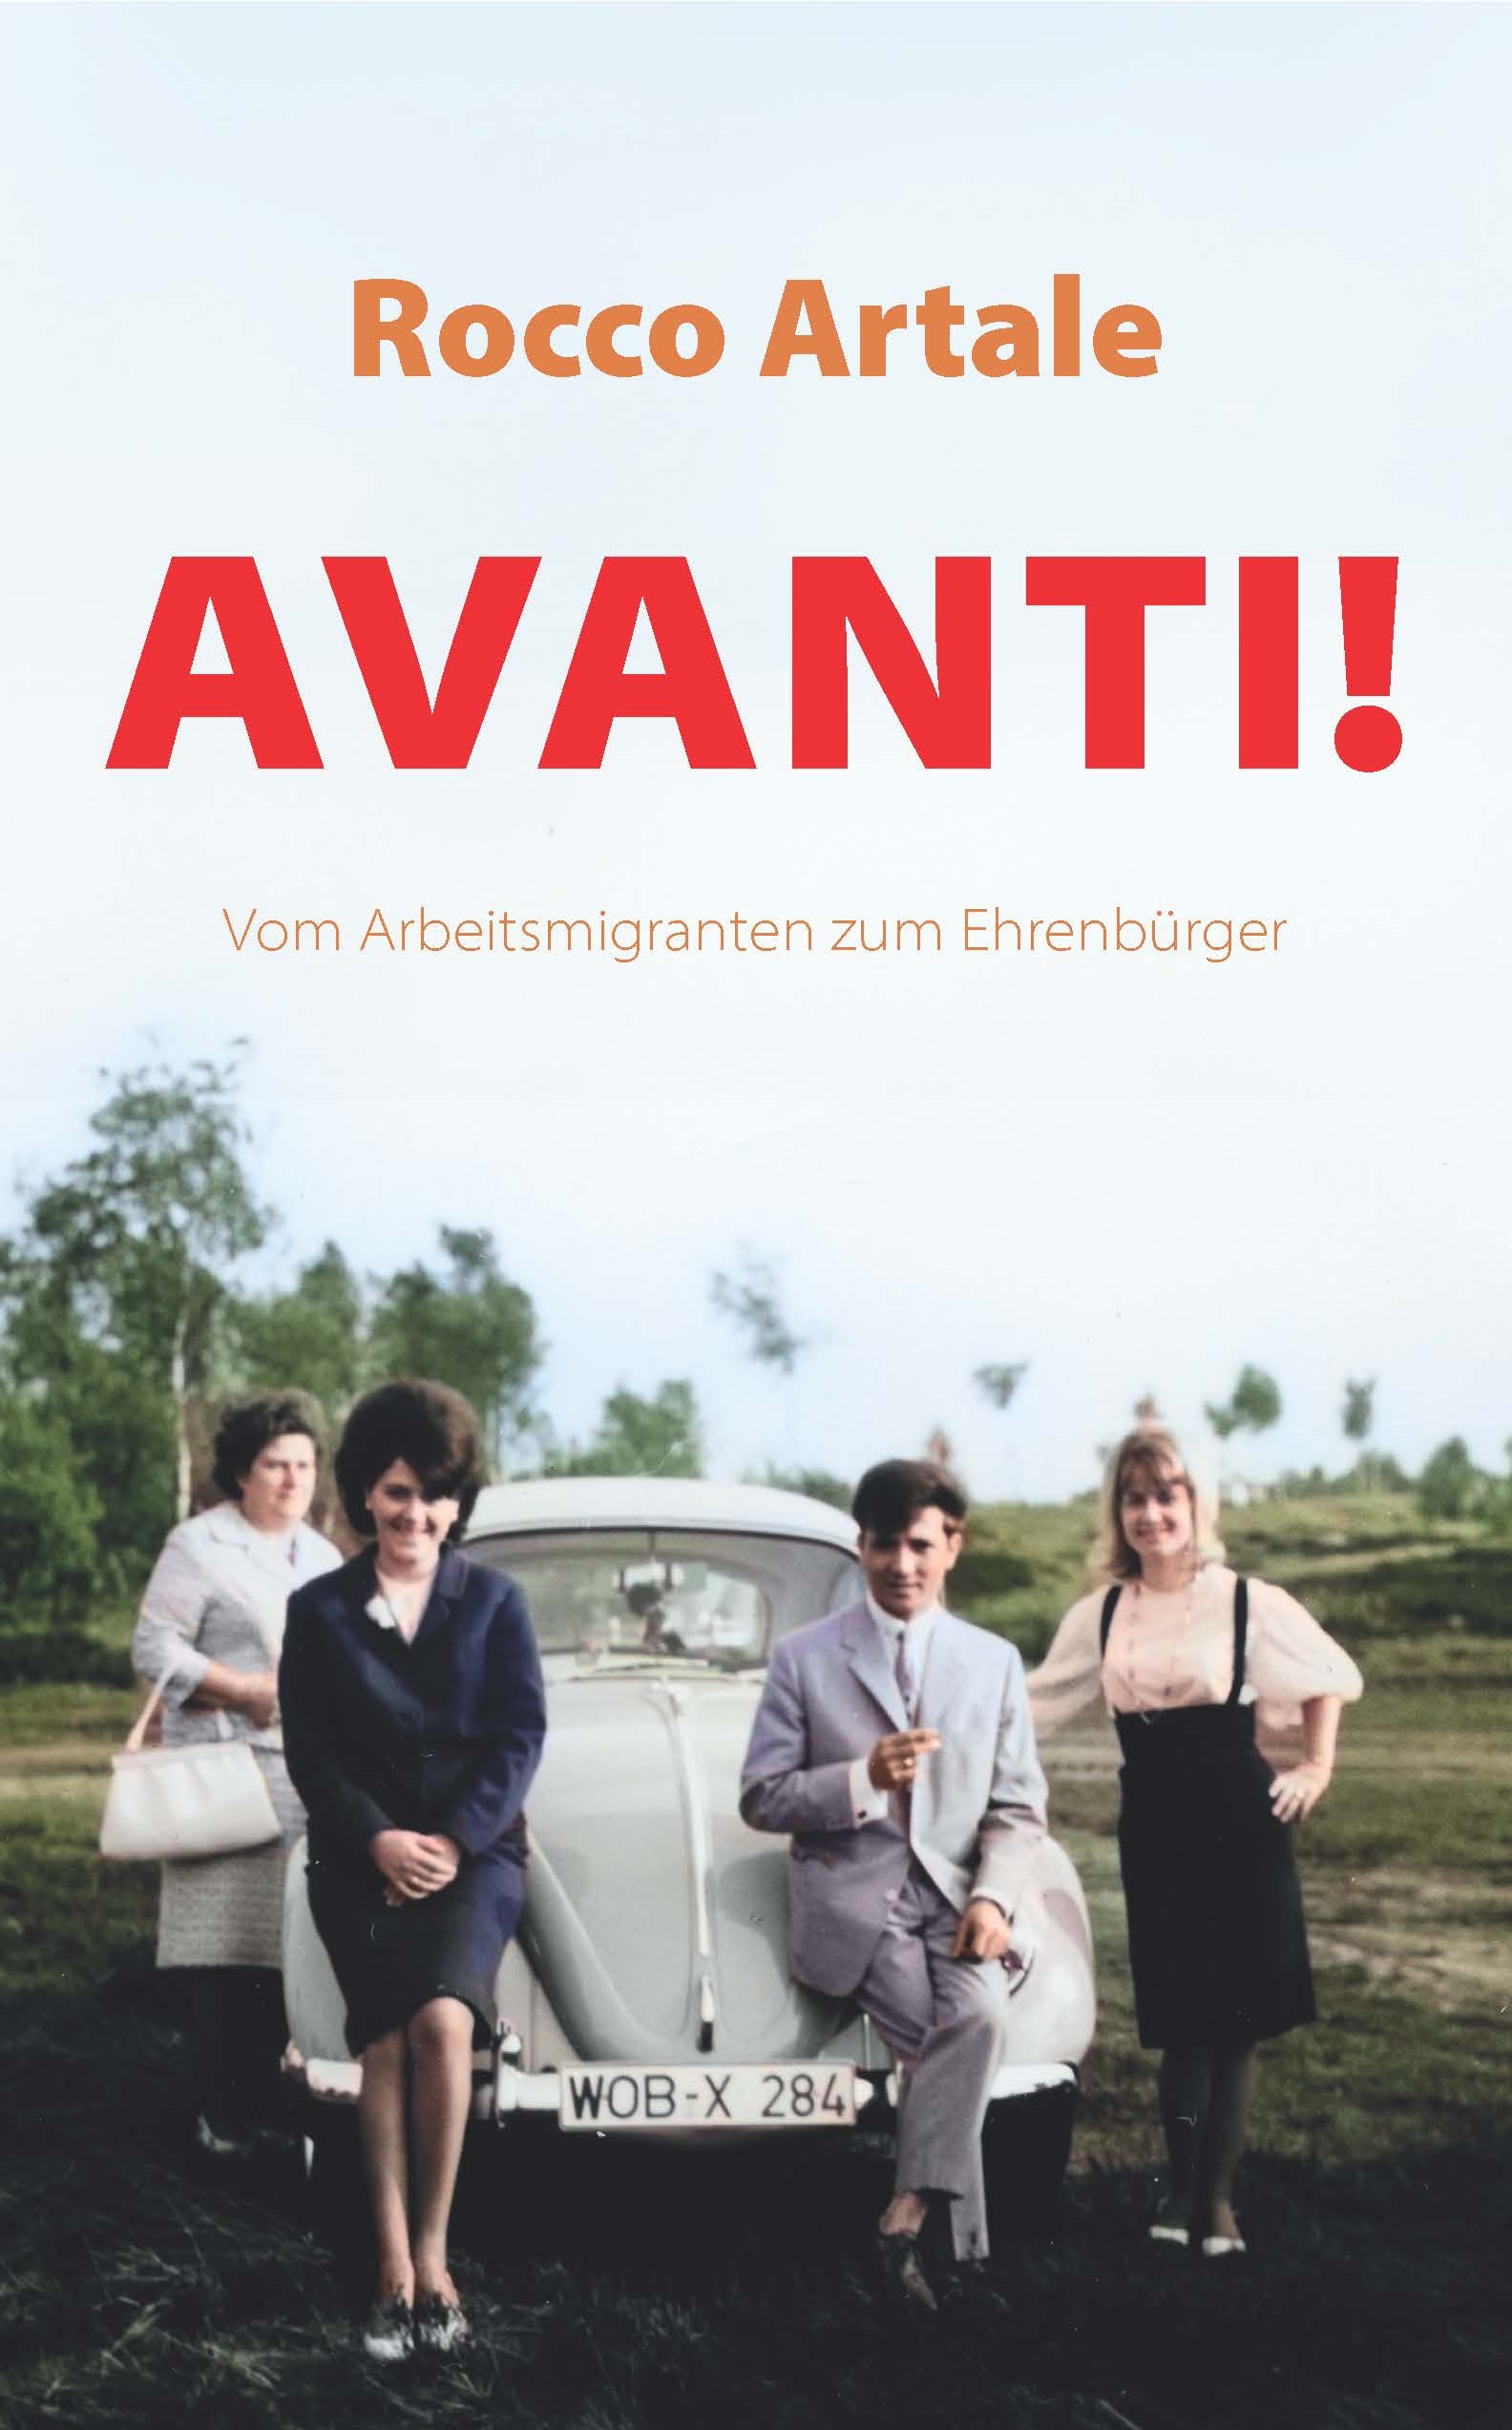 Title page of the book "Avanti! From migrant worker to honorary citizen" by Rocco Artale